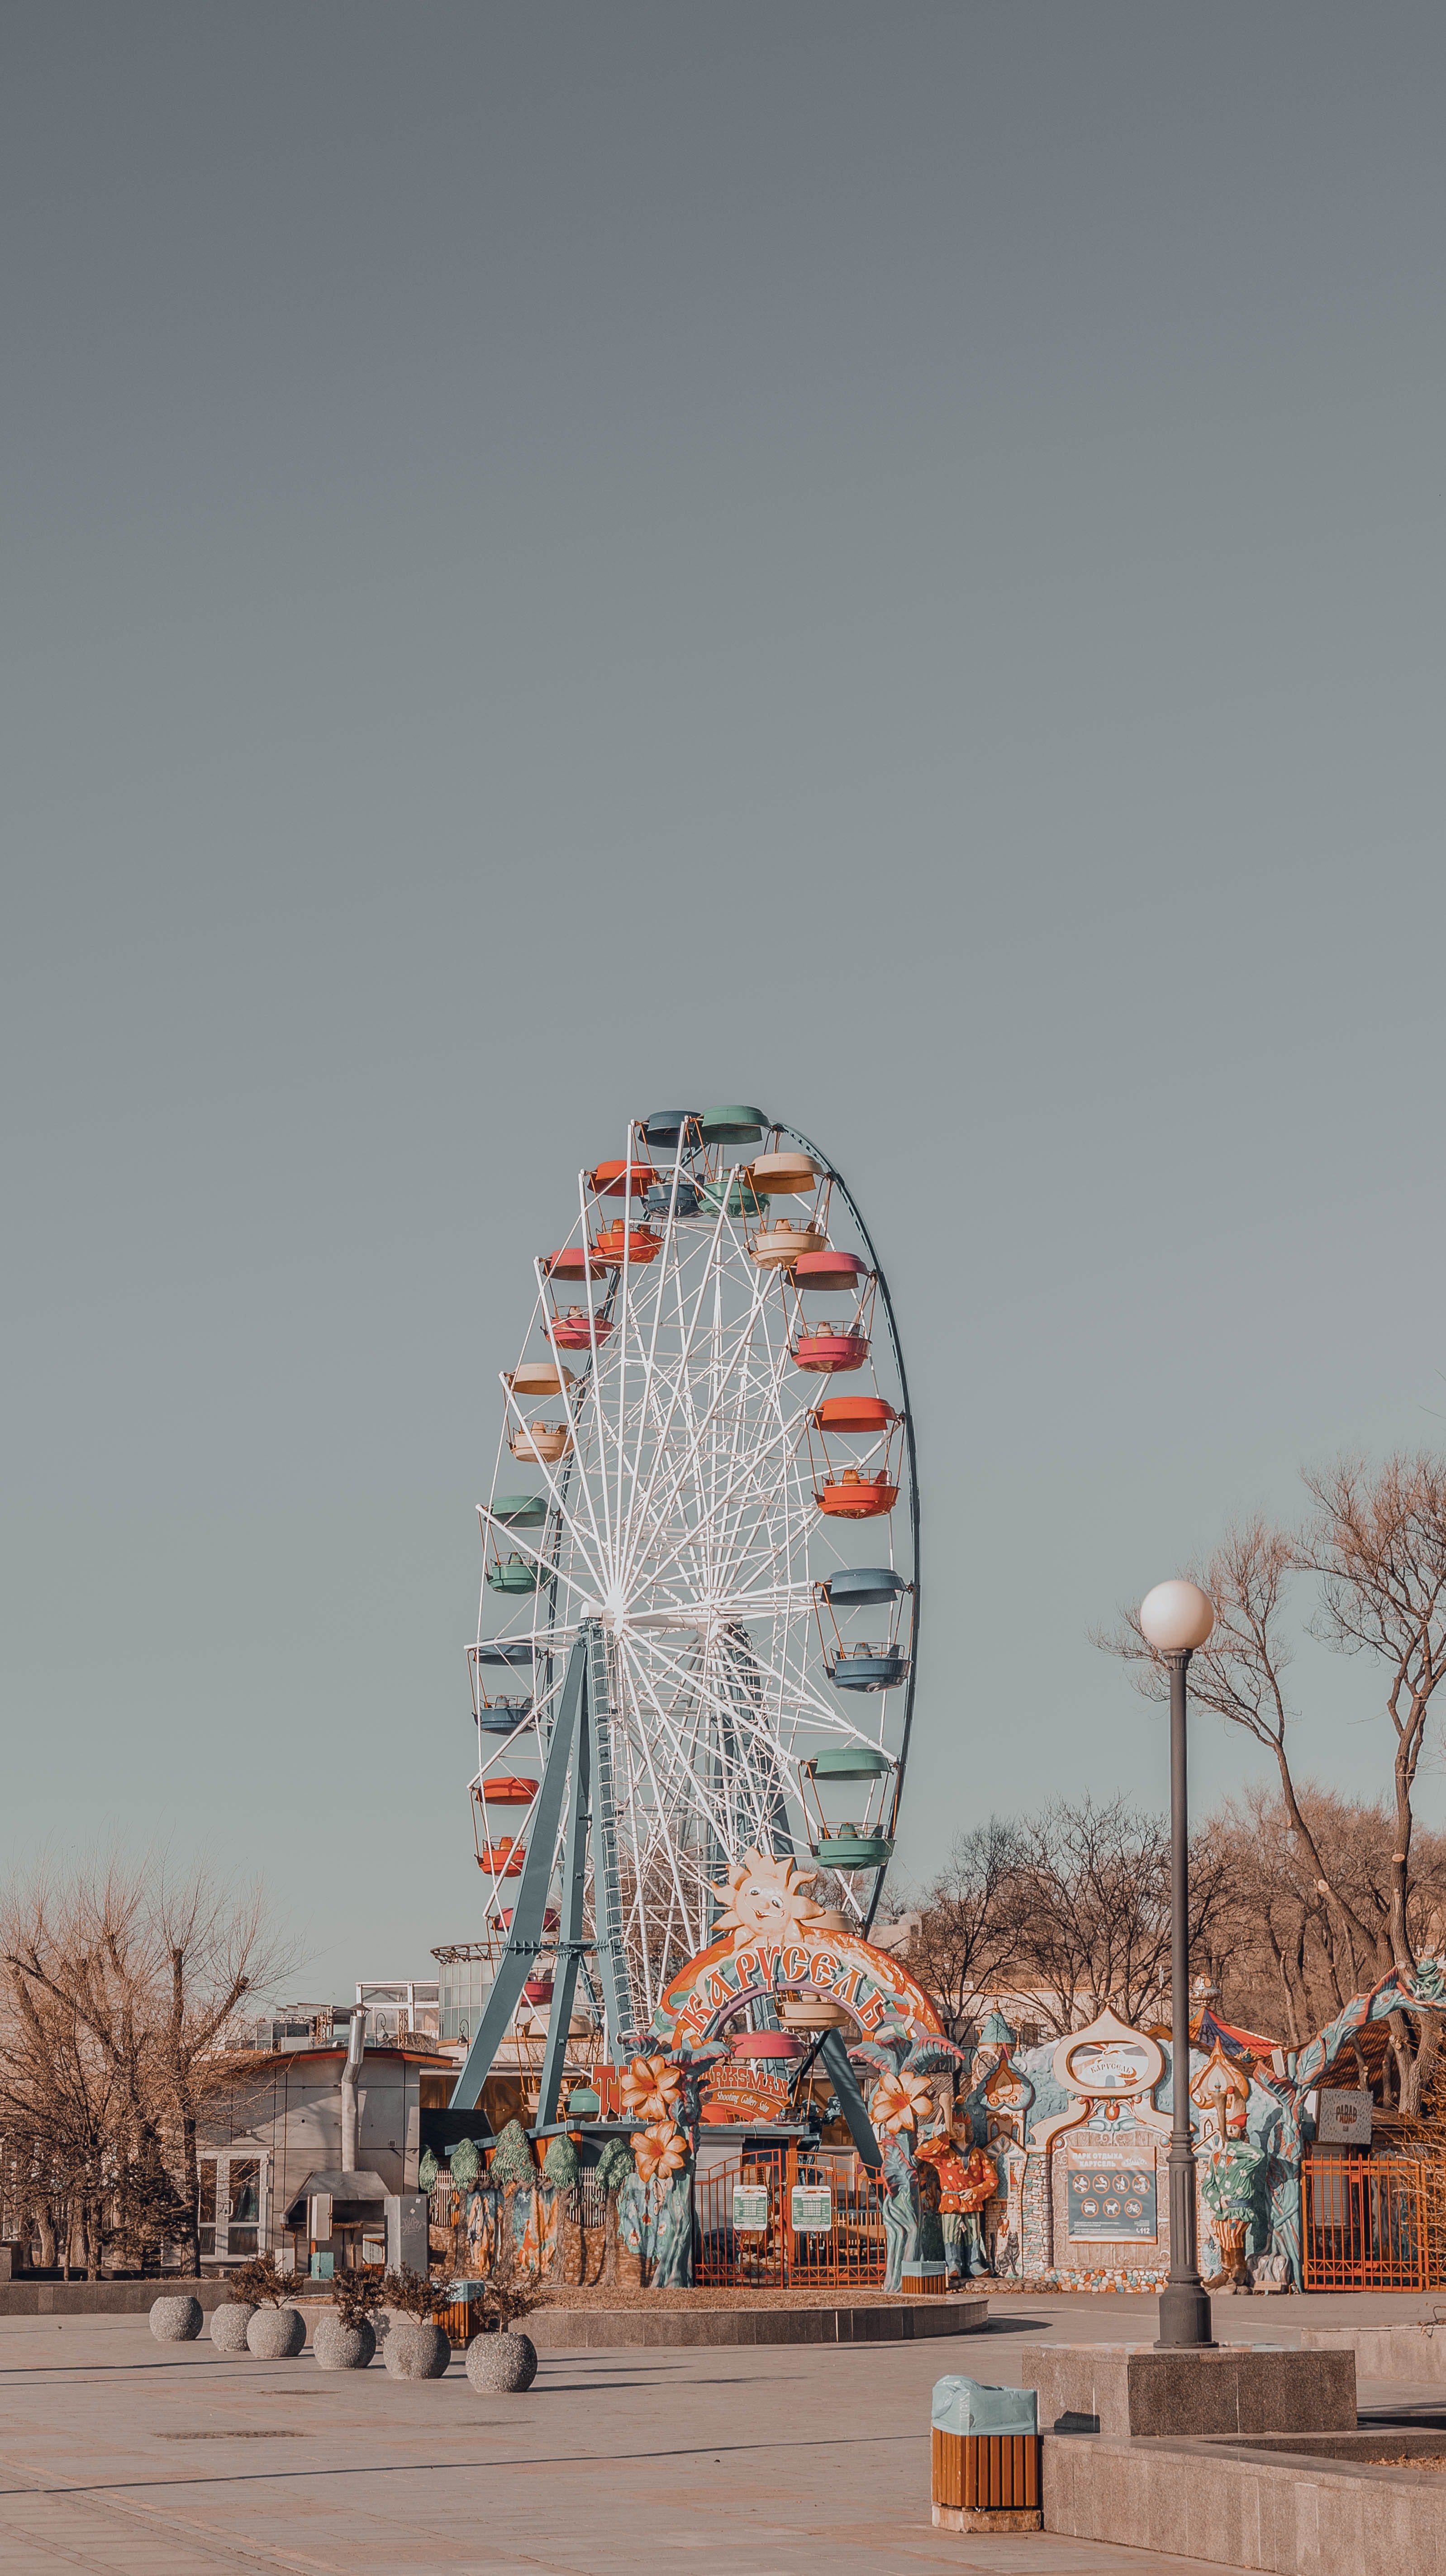 Derek and Sylvia guessed Oliver could be at the amusement park. | Source: Unsplash